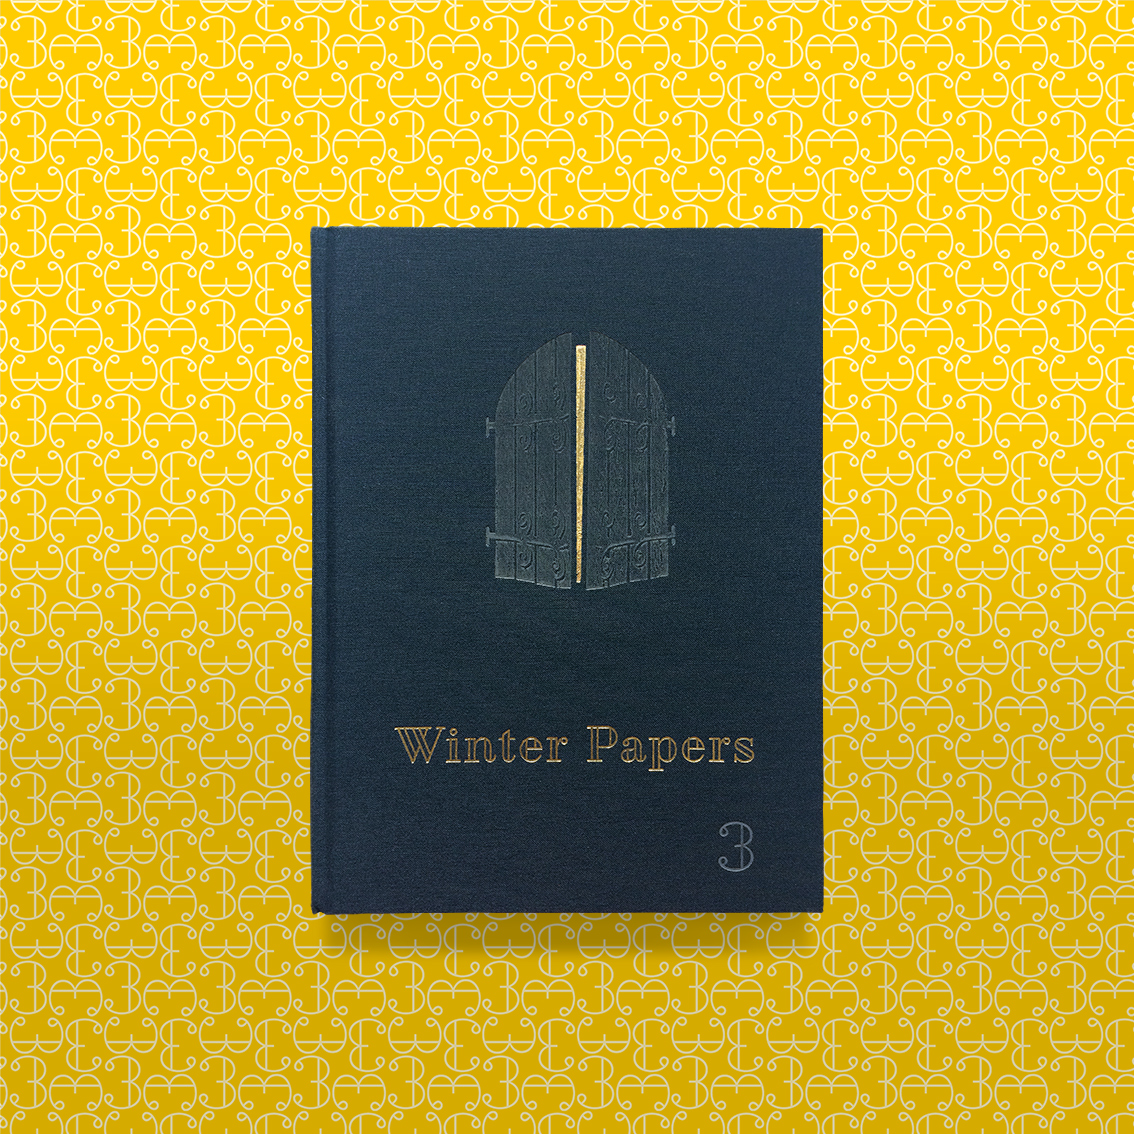 Winter Papers, volume 3